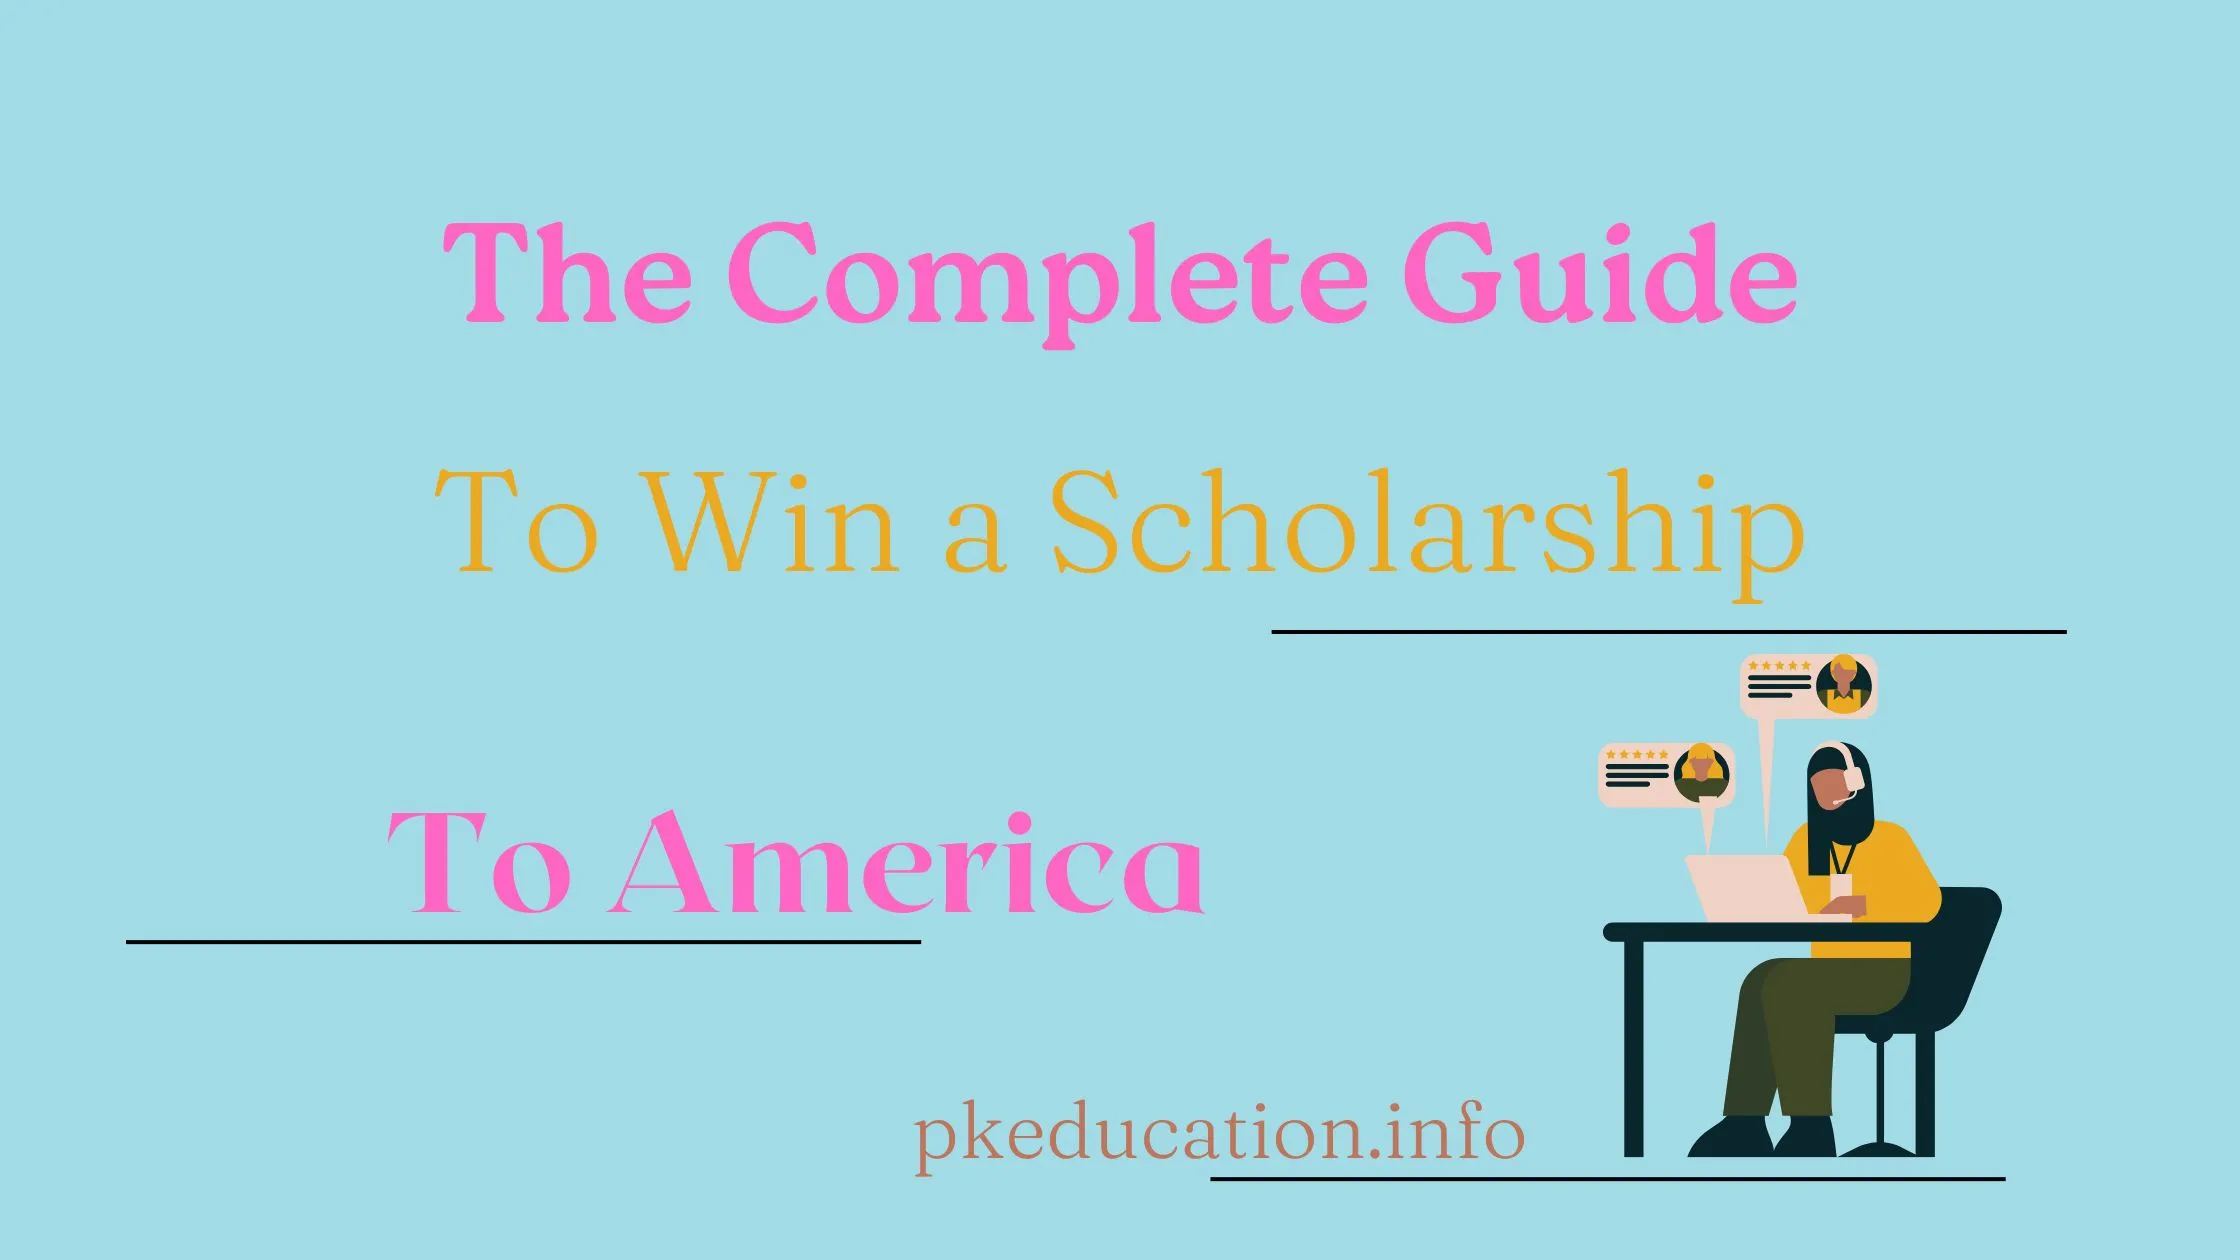 The Complete Guide to Winning a Scholarship to America